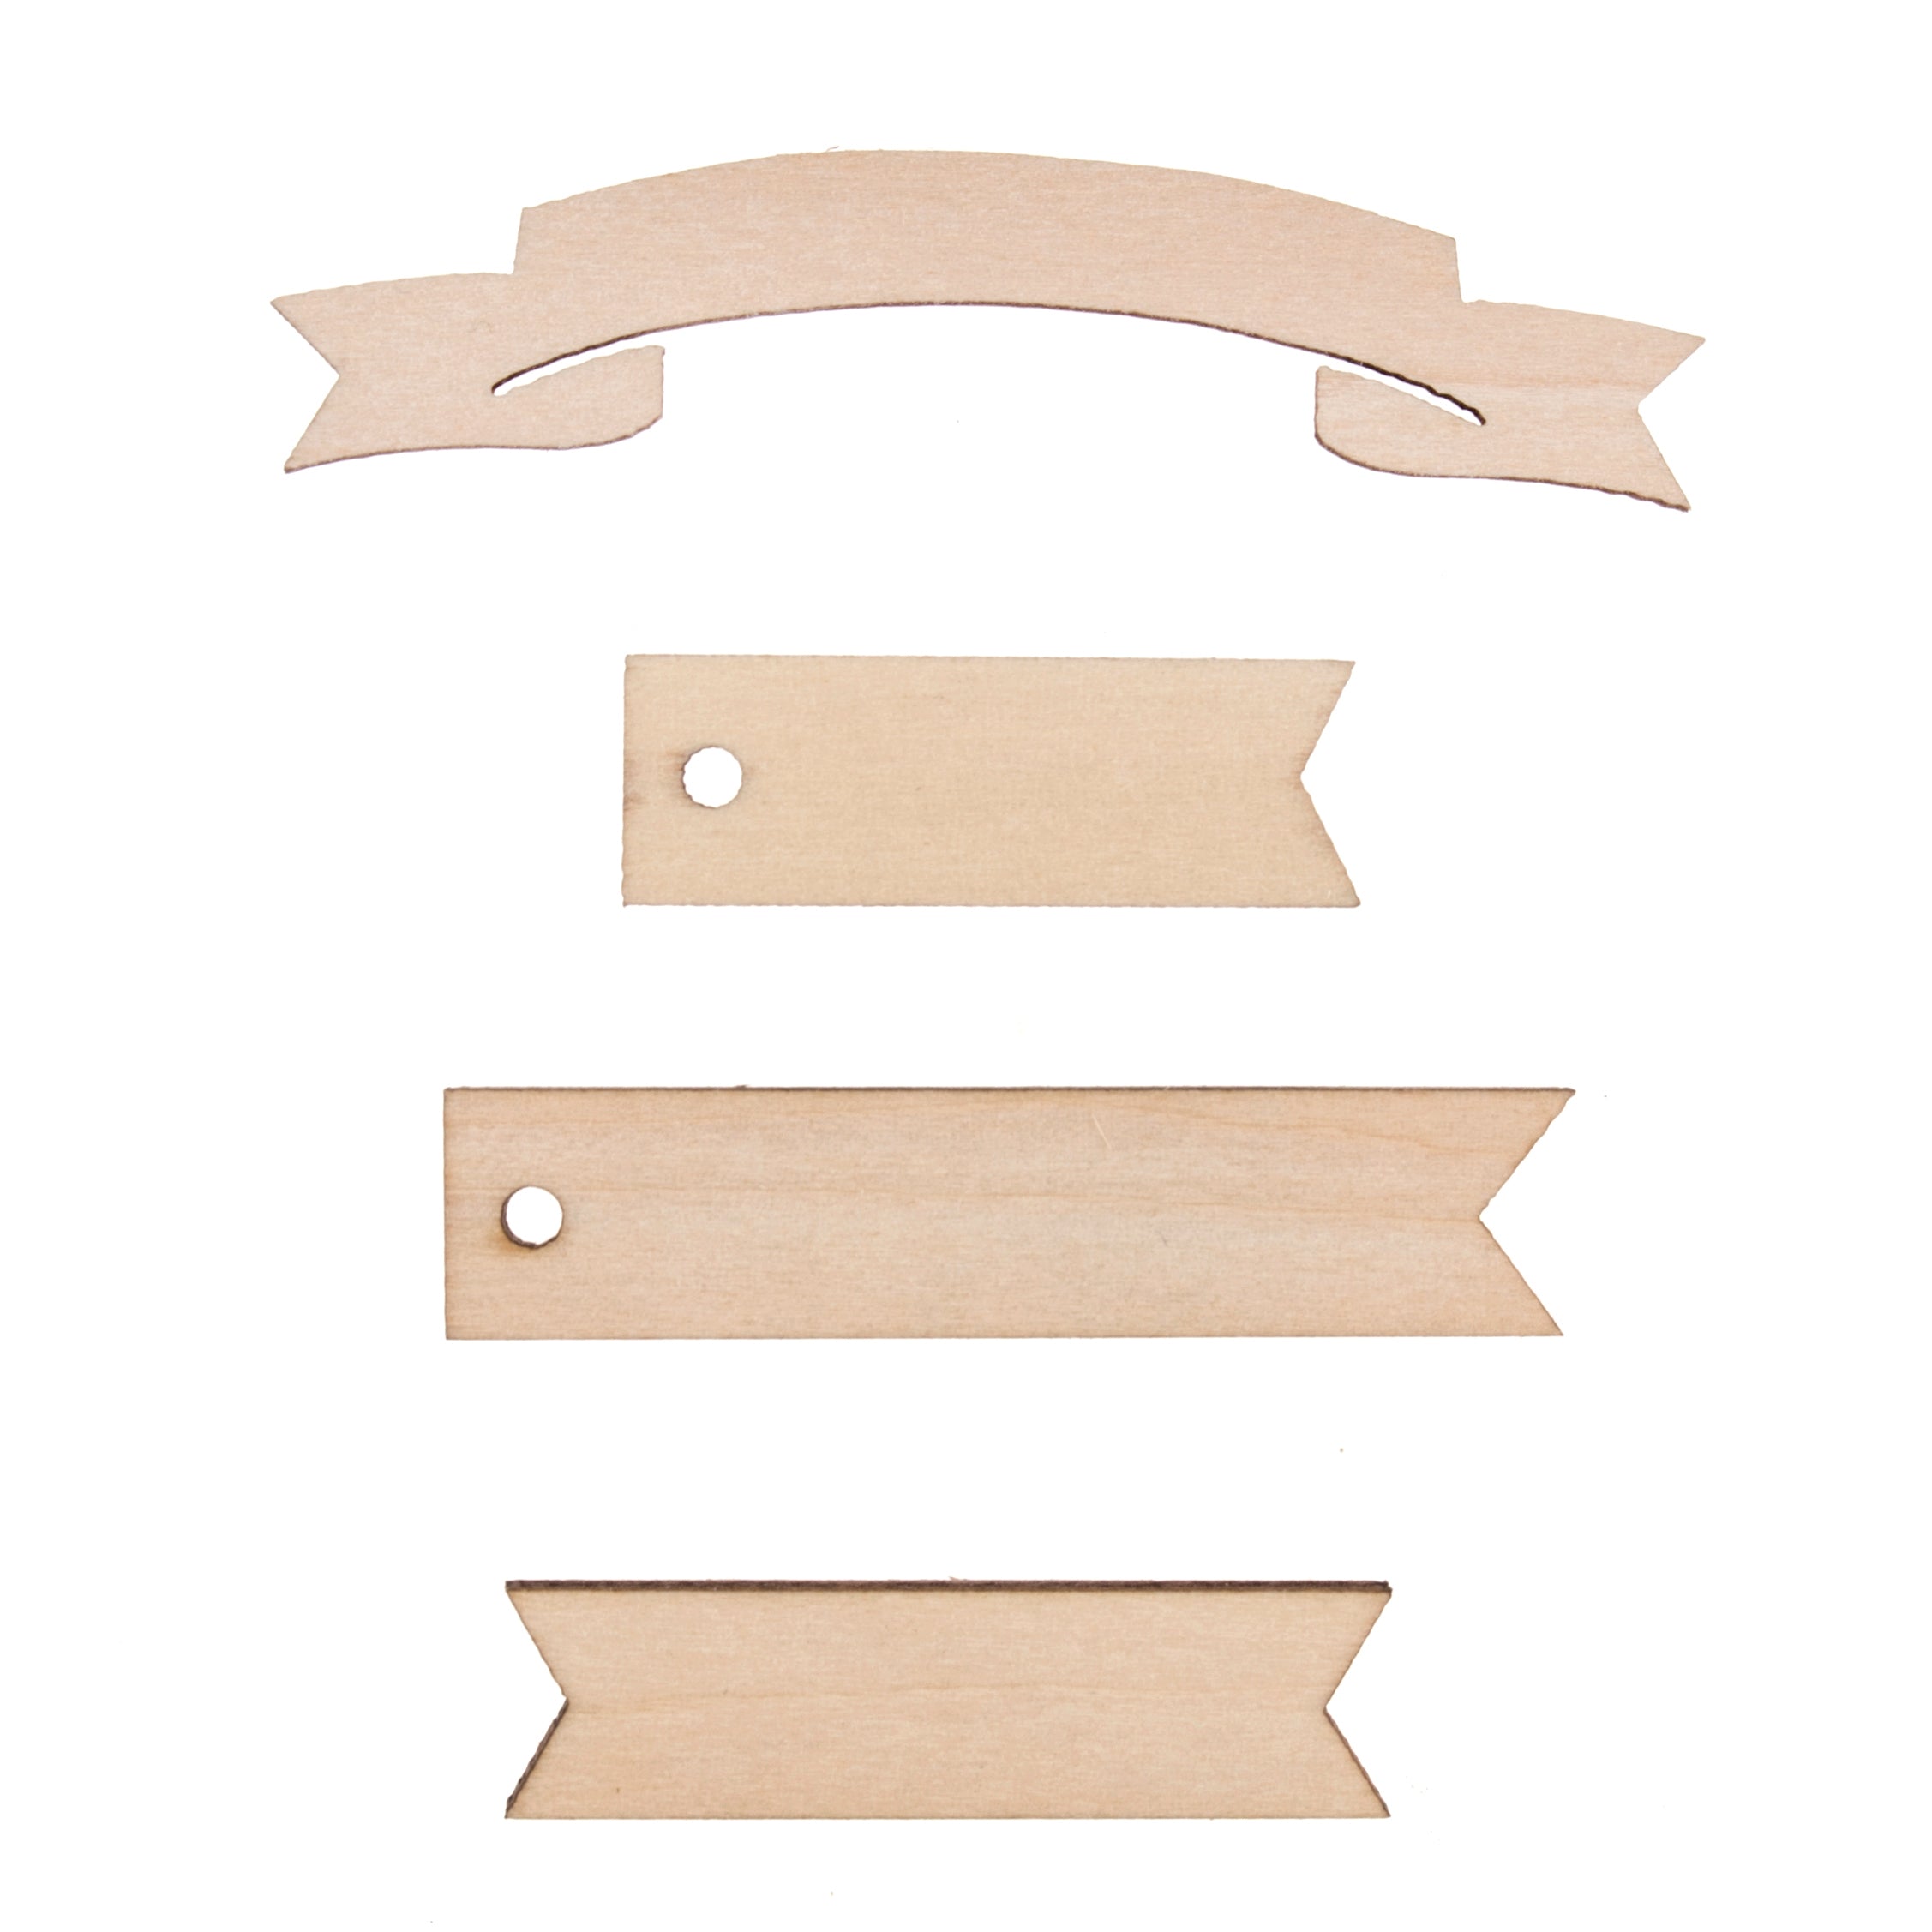 Craft Embellishments: Wooden Banners - 16pc